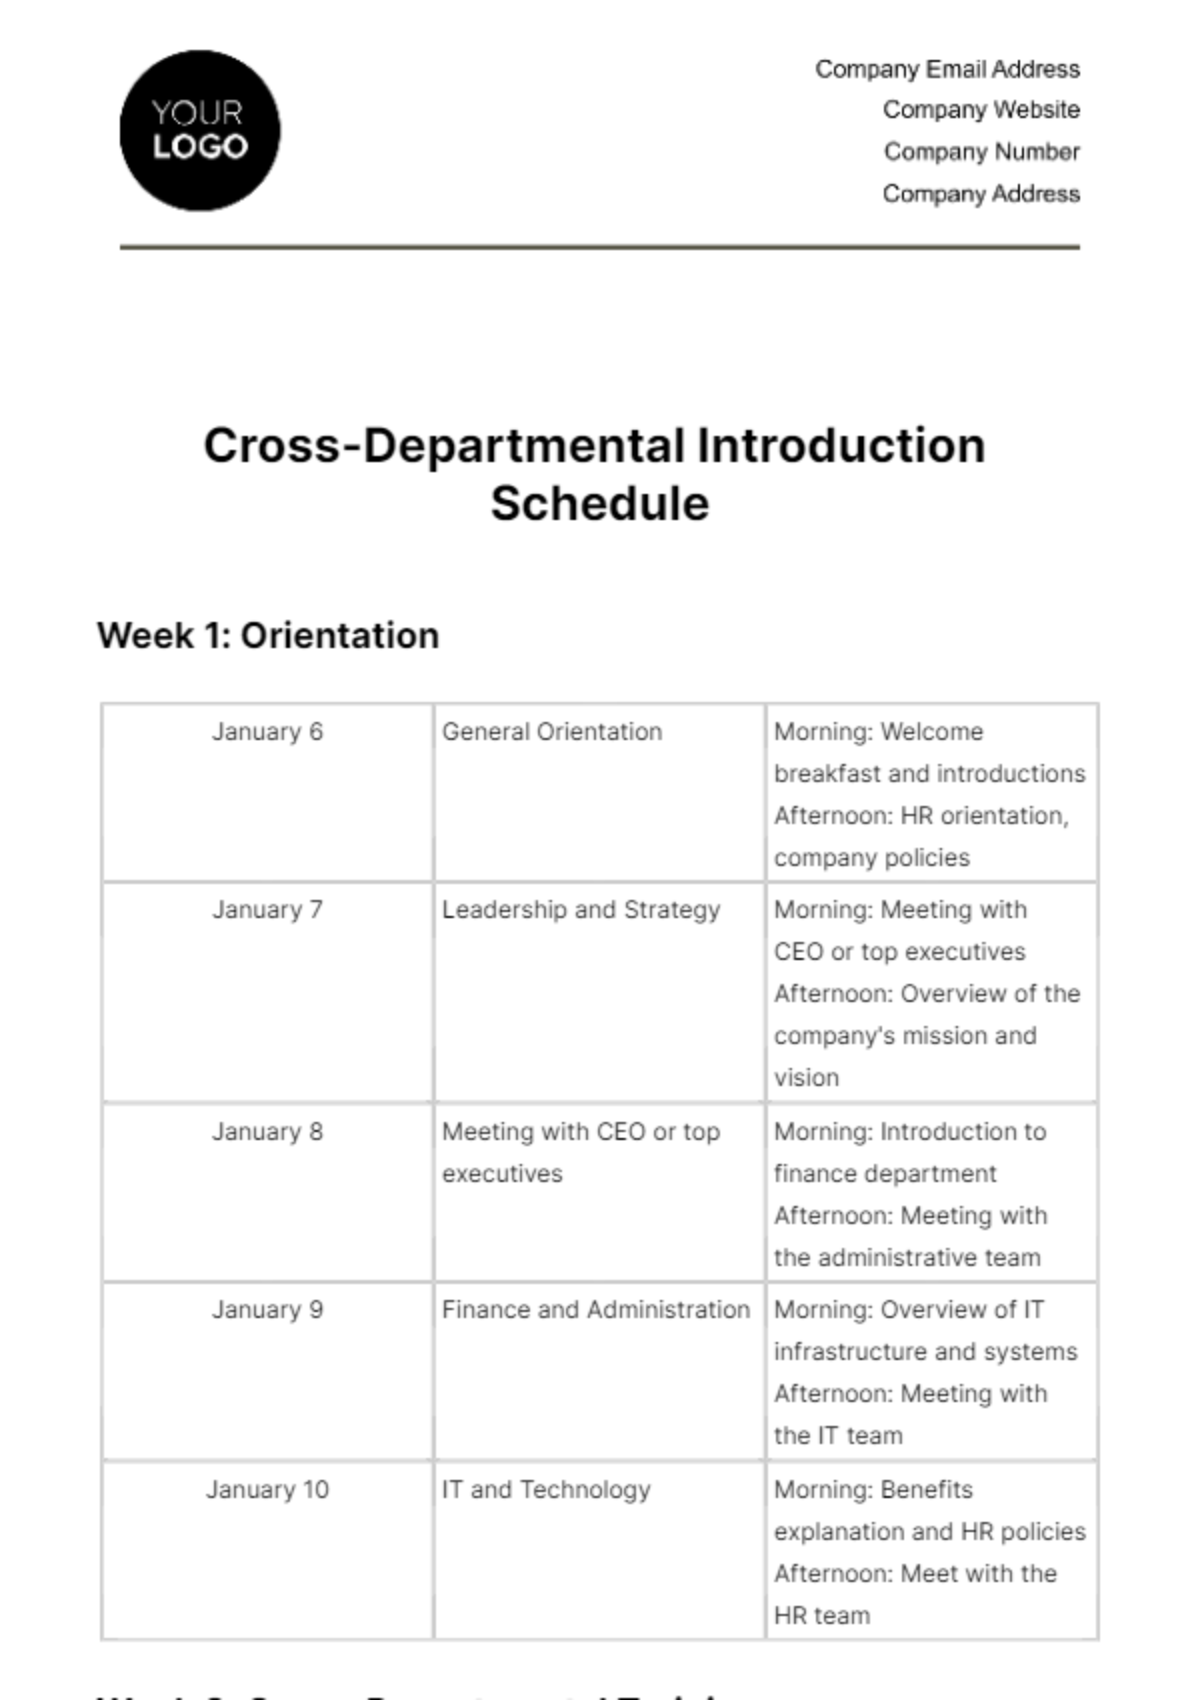 Free Cross-Departmental Introduction Schedule HR Template